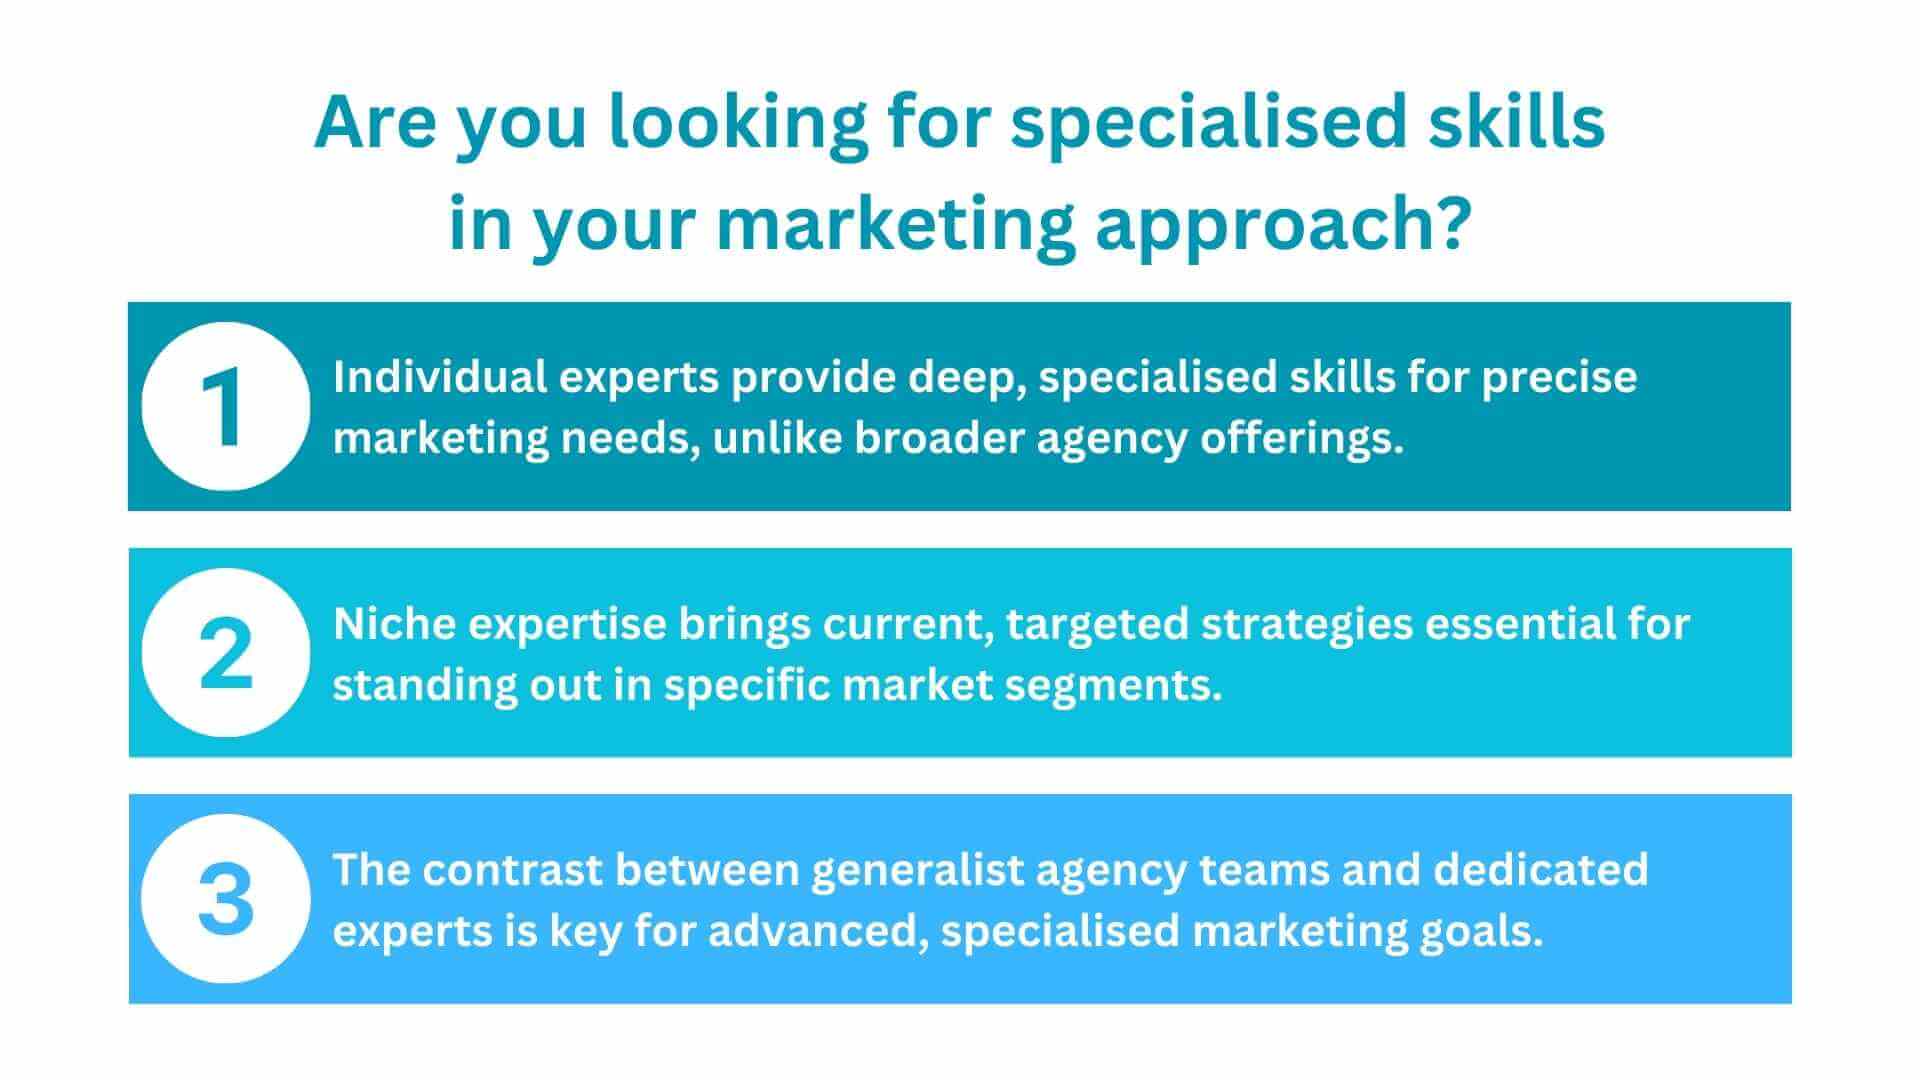 Are you looking for specialised skills in your marketing approach?